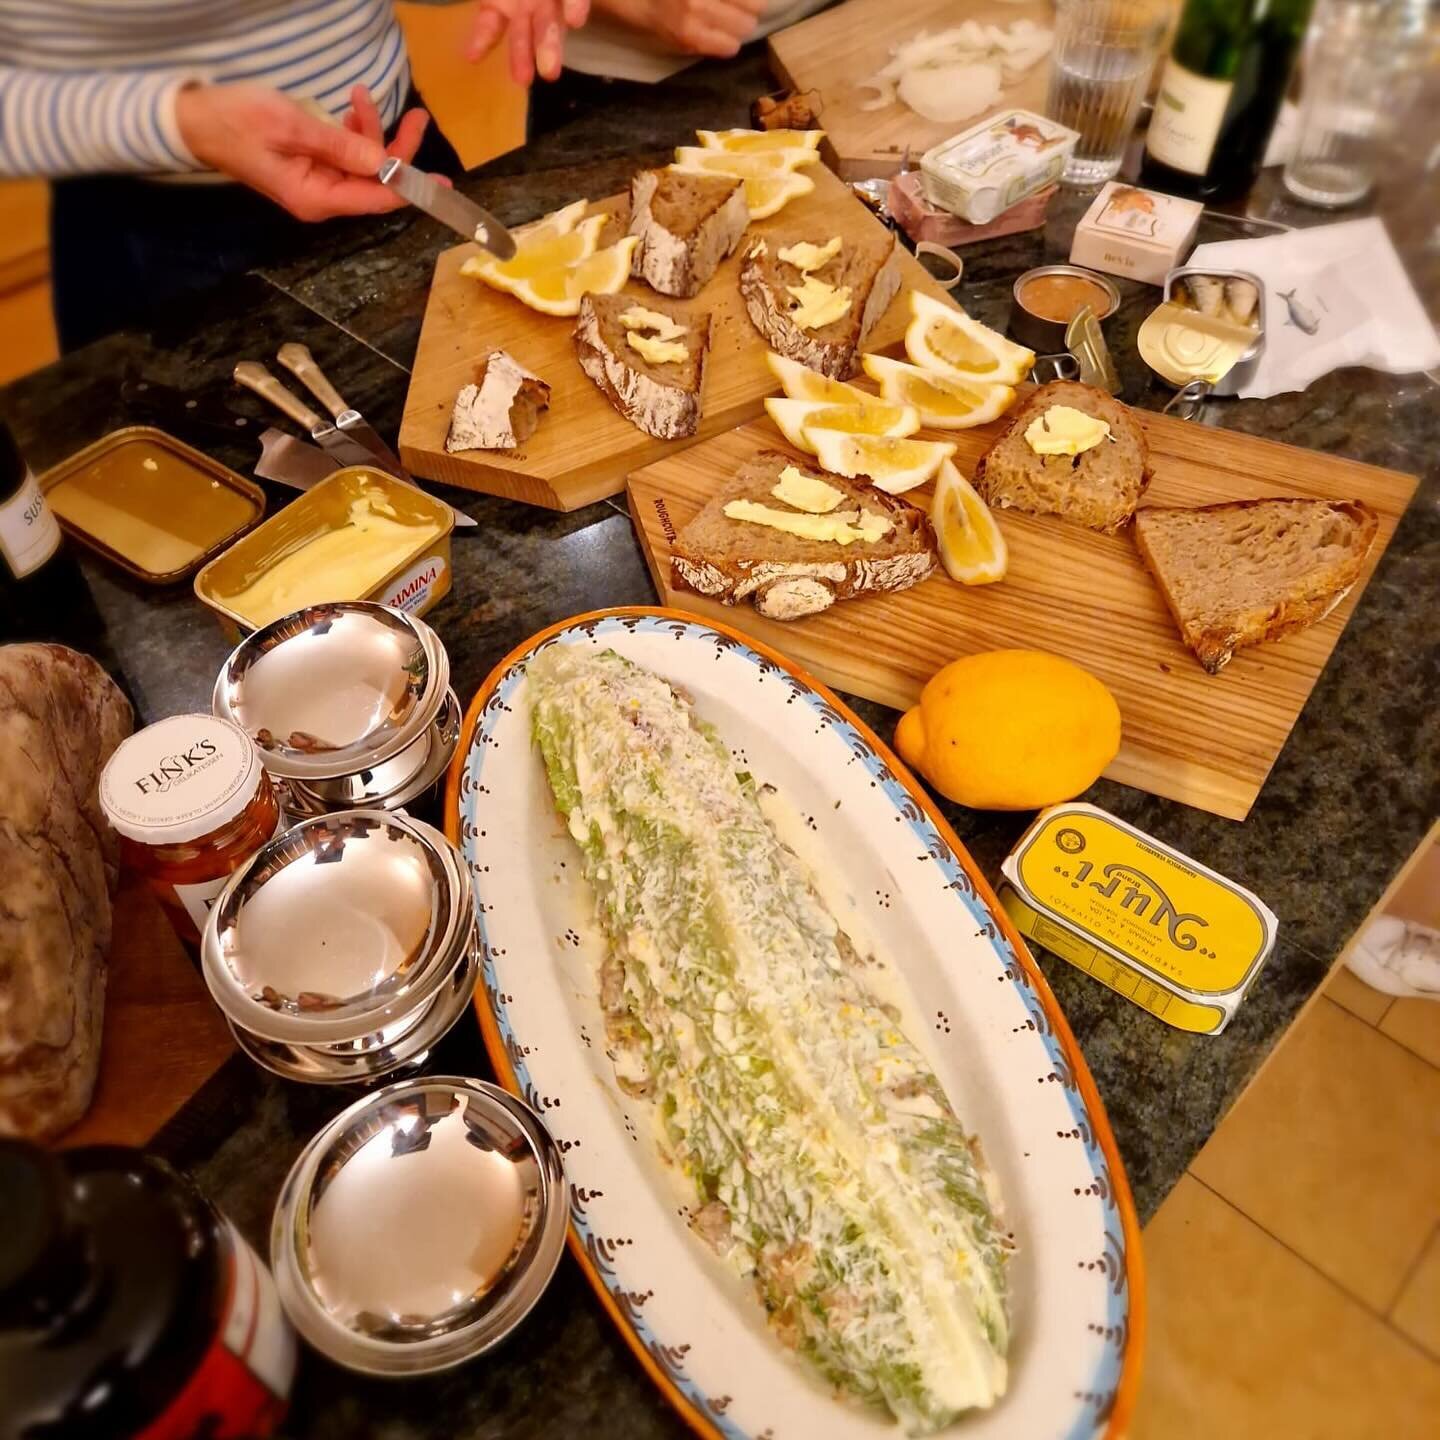 Fish &amp; Wine &amp; Friends 
Best @nuri_sardine and the most delicious Cantabrigian anchovies with fresh sour dough bread and butter. What more do you want? So grateful for my lovely #drinksgiving friends. ❤️